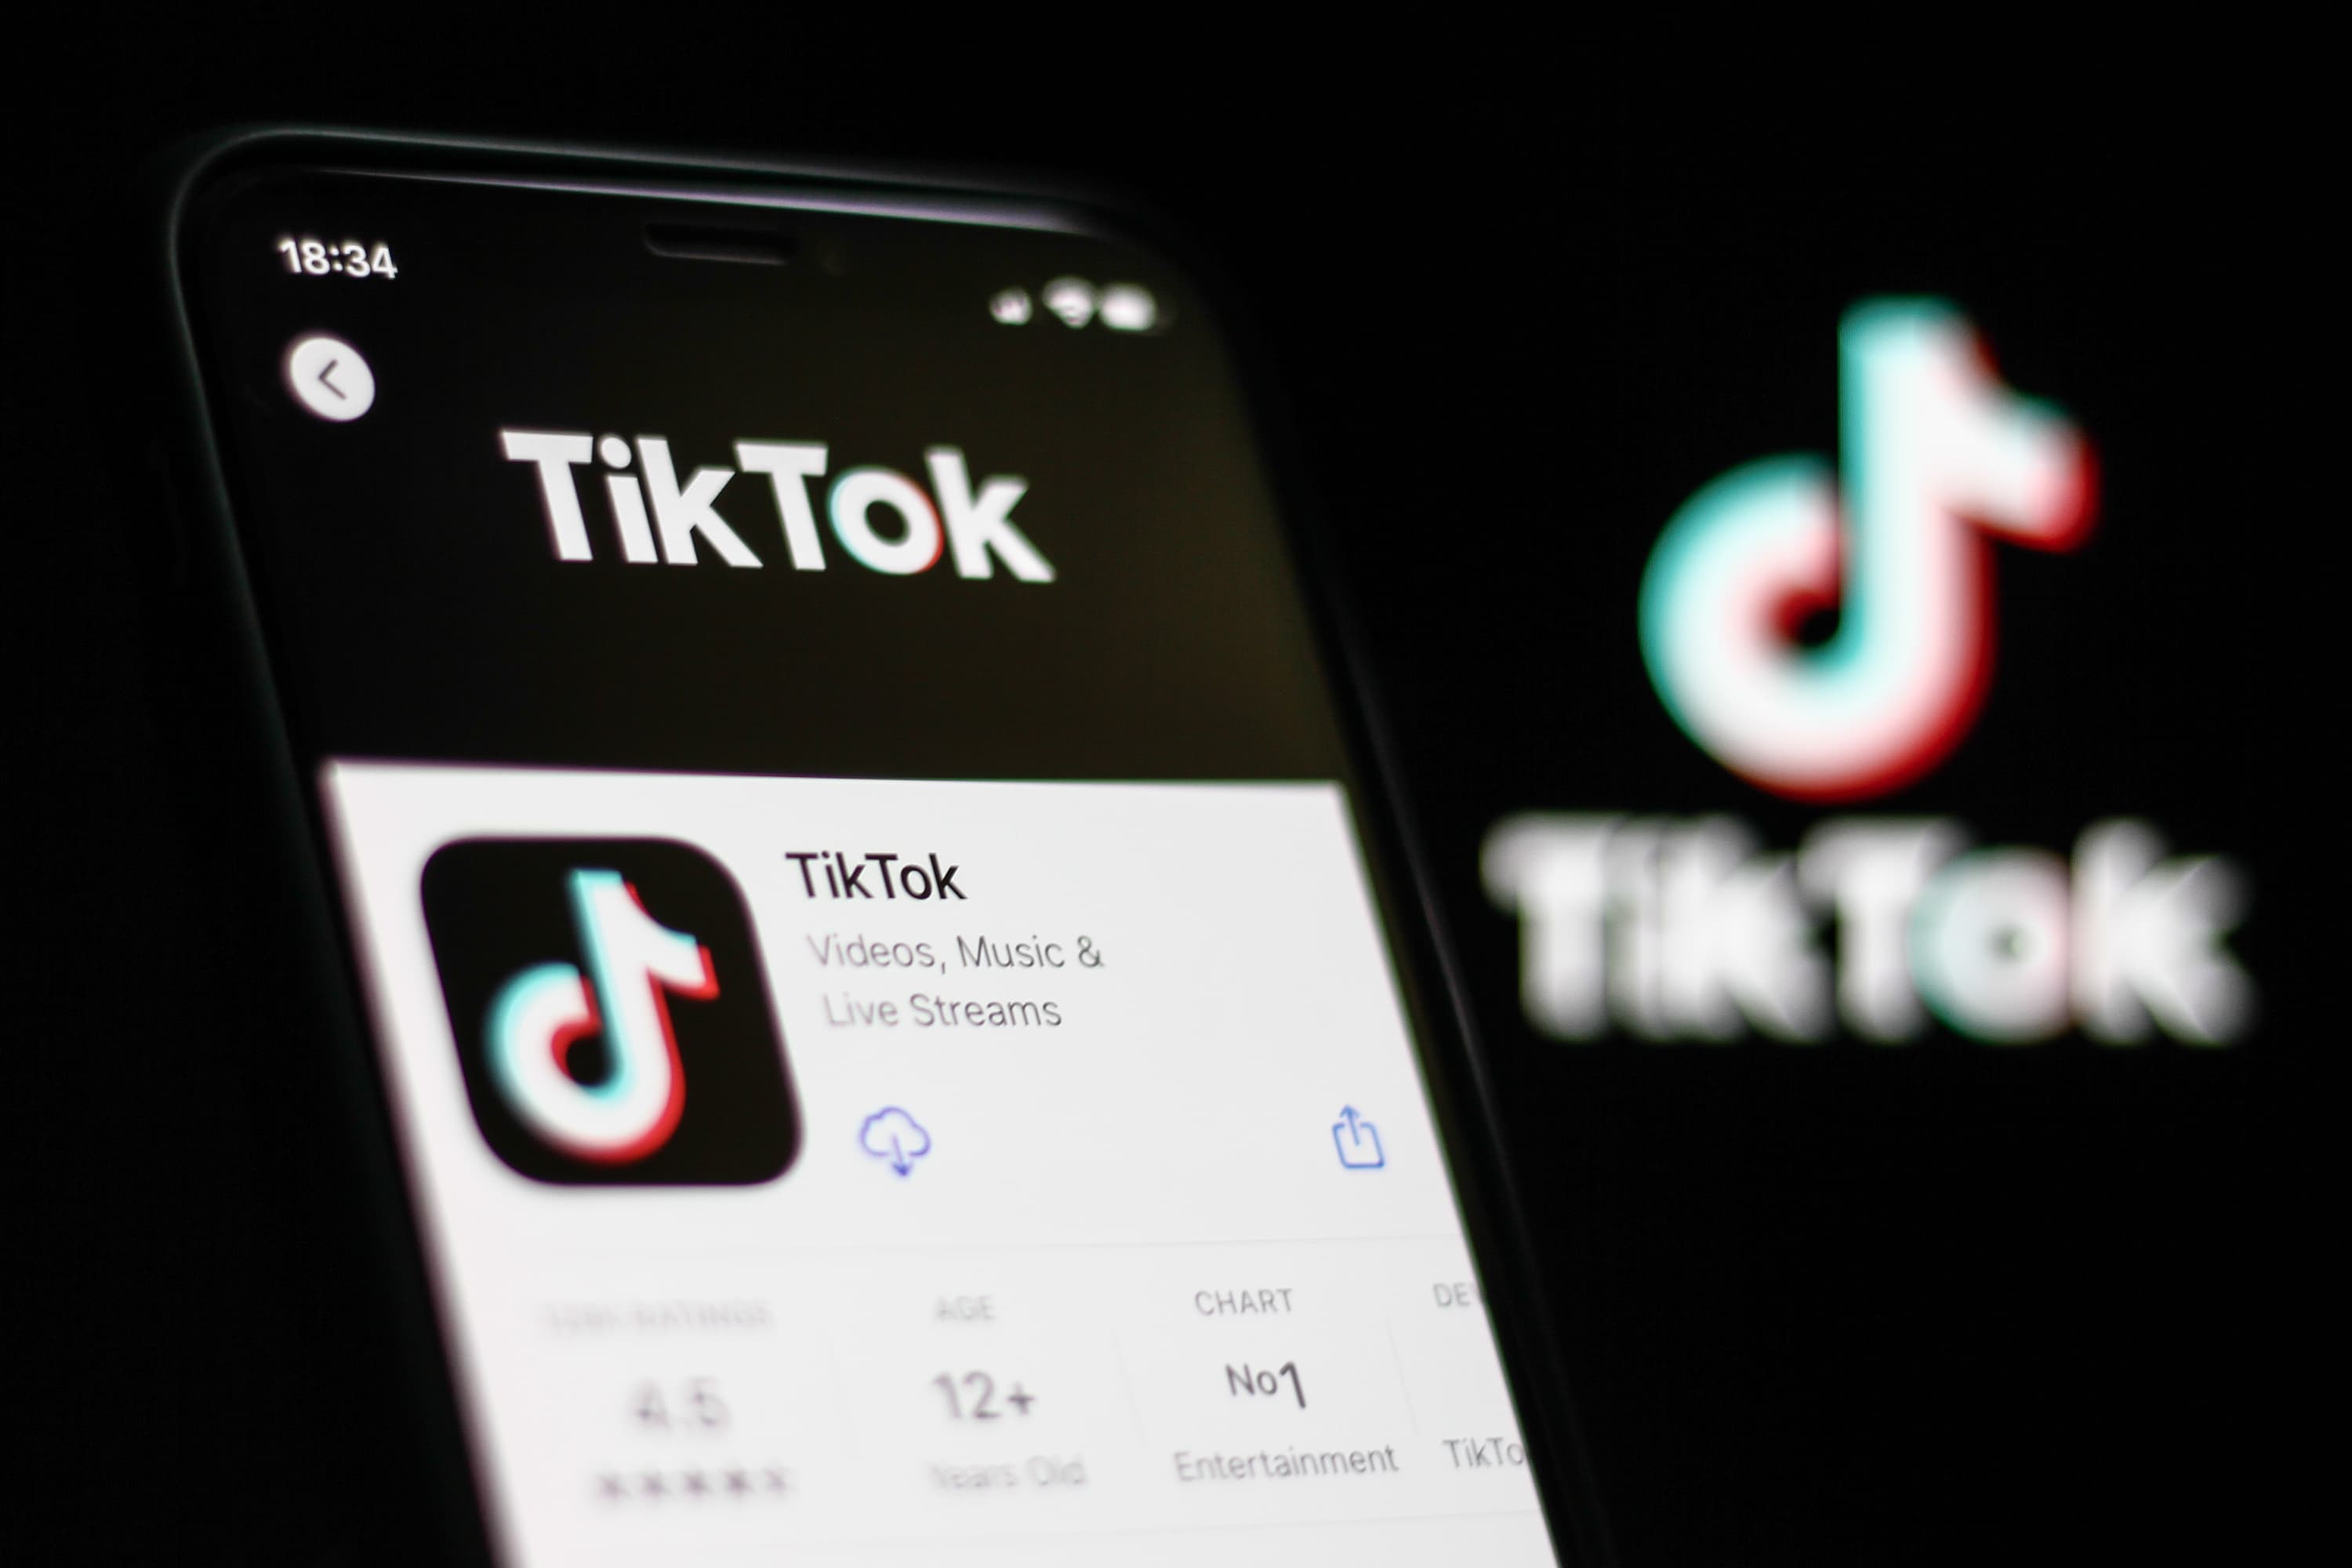 TikTok shares your data more than any other social media app